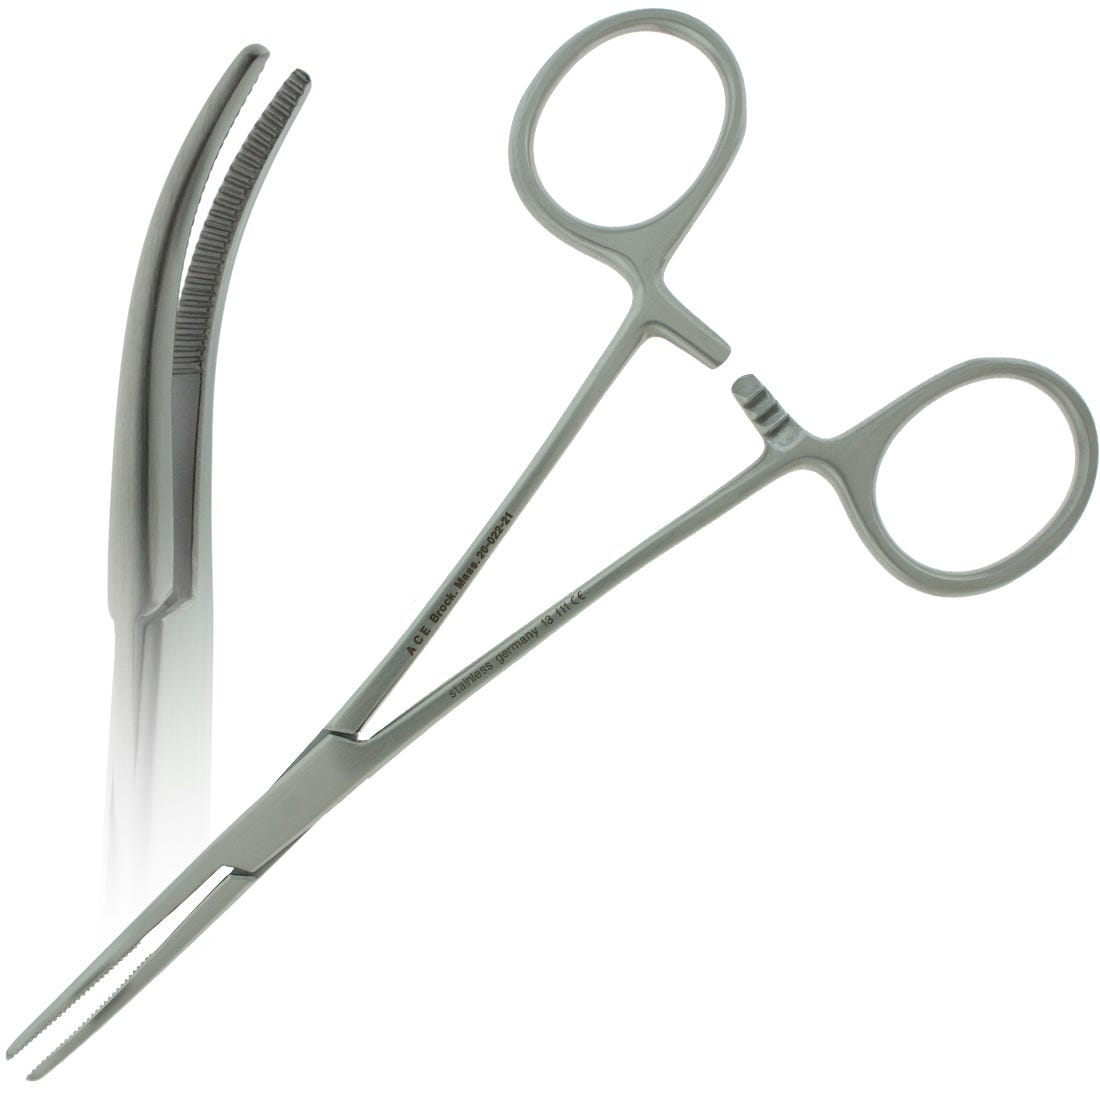 ACE Providence Kelly Forcep, curved, 5-1/2", 14cm